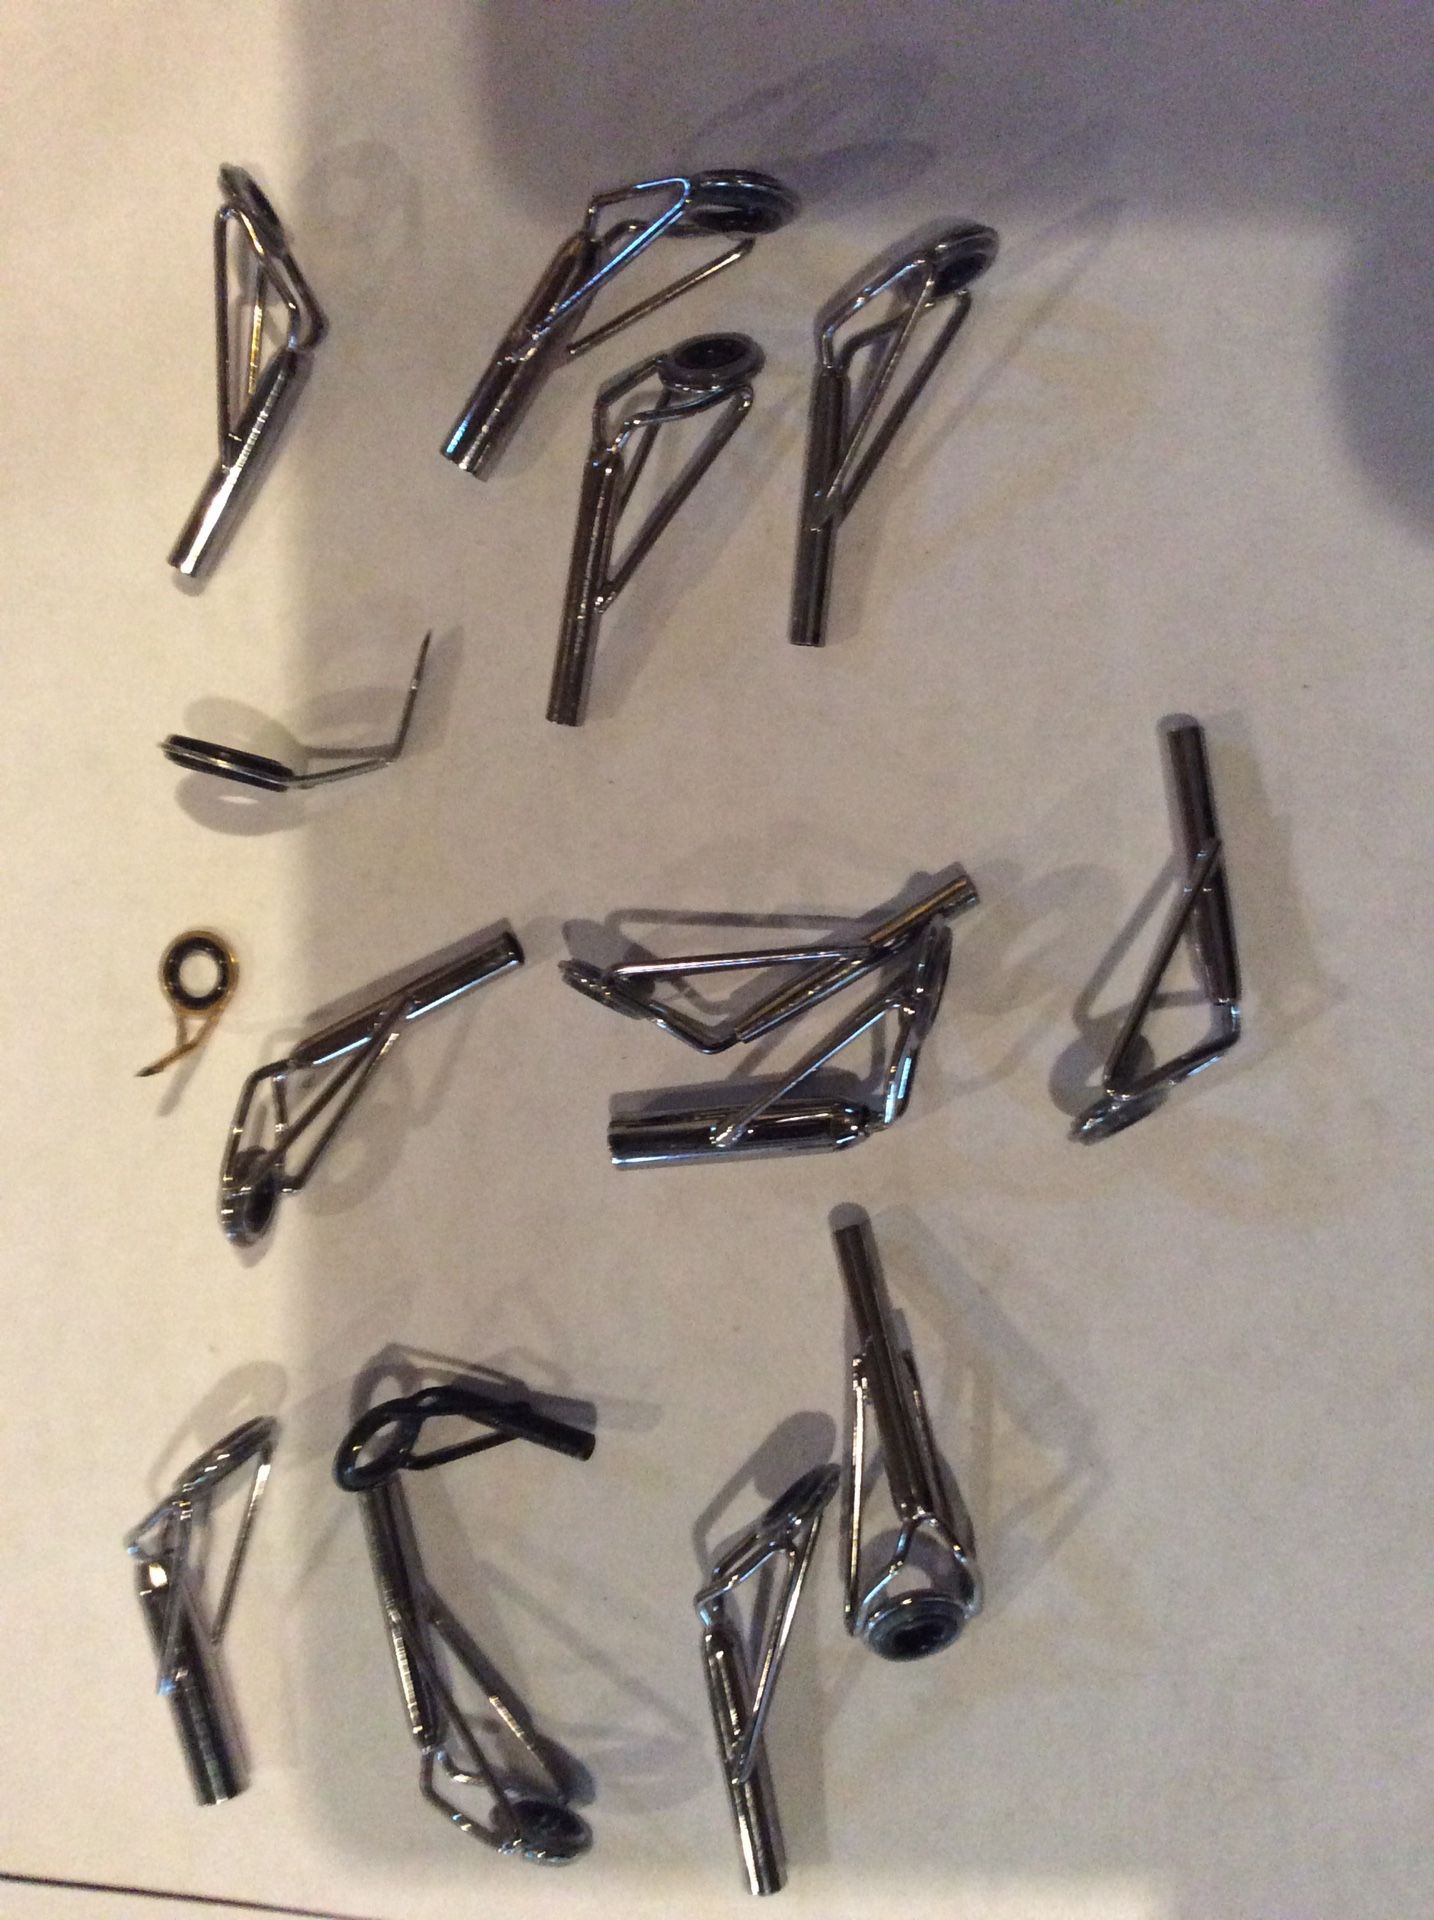 Fishing rod tips. $5 for all